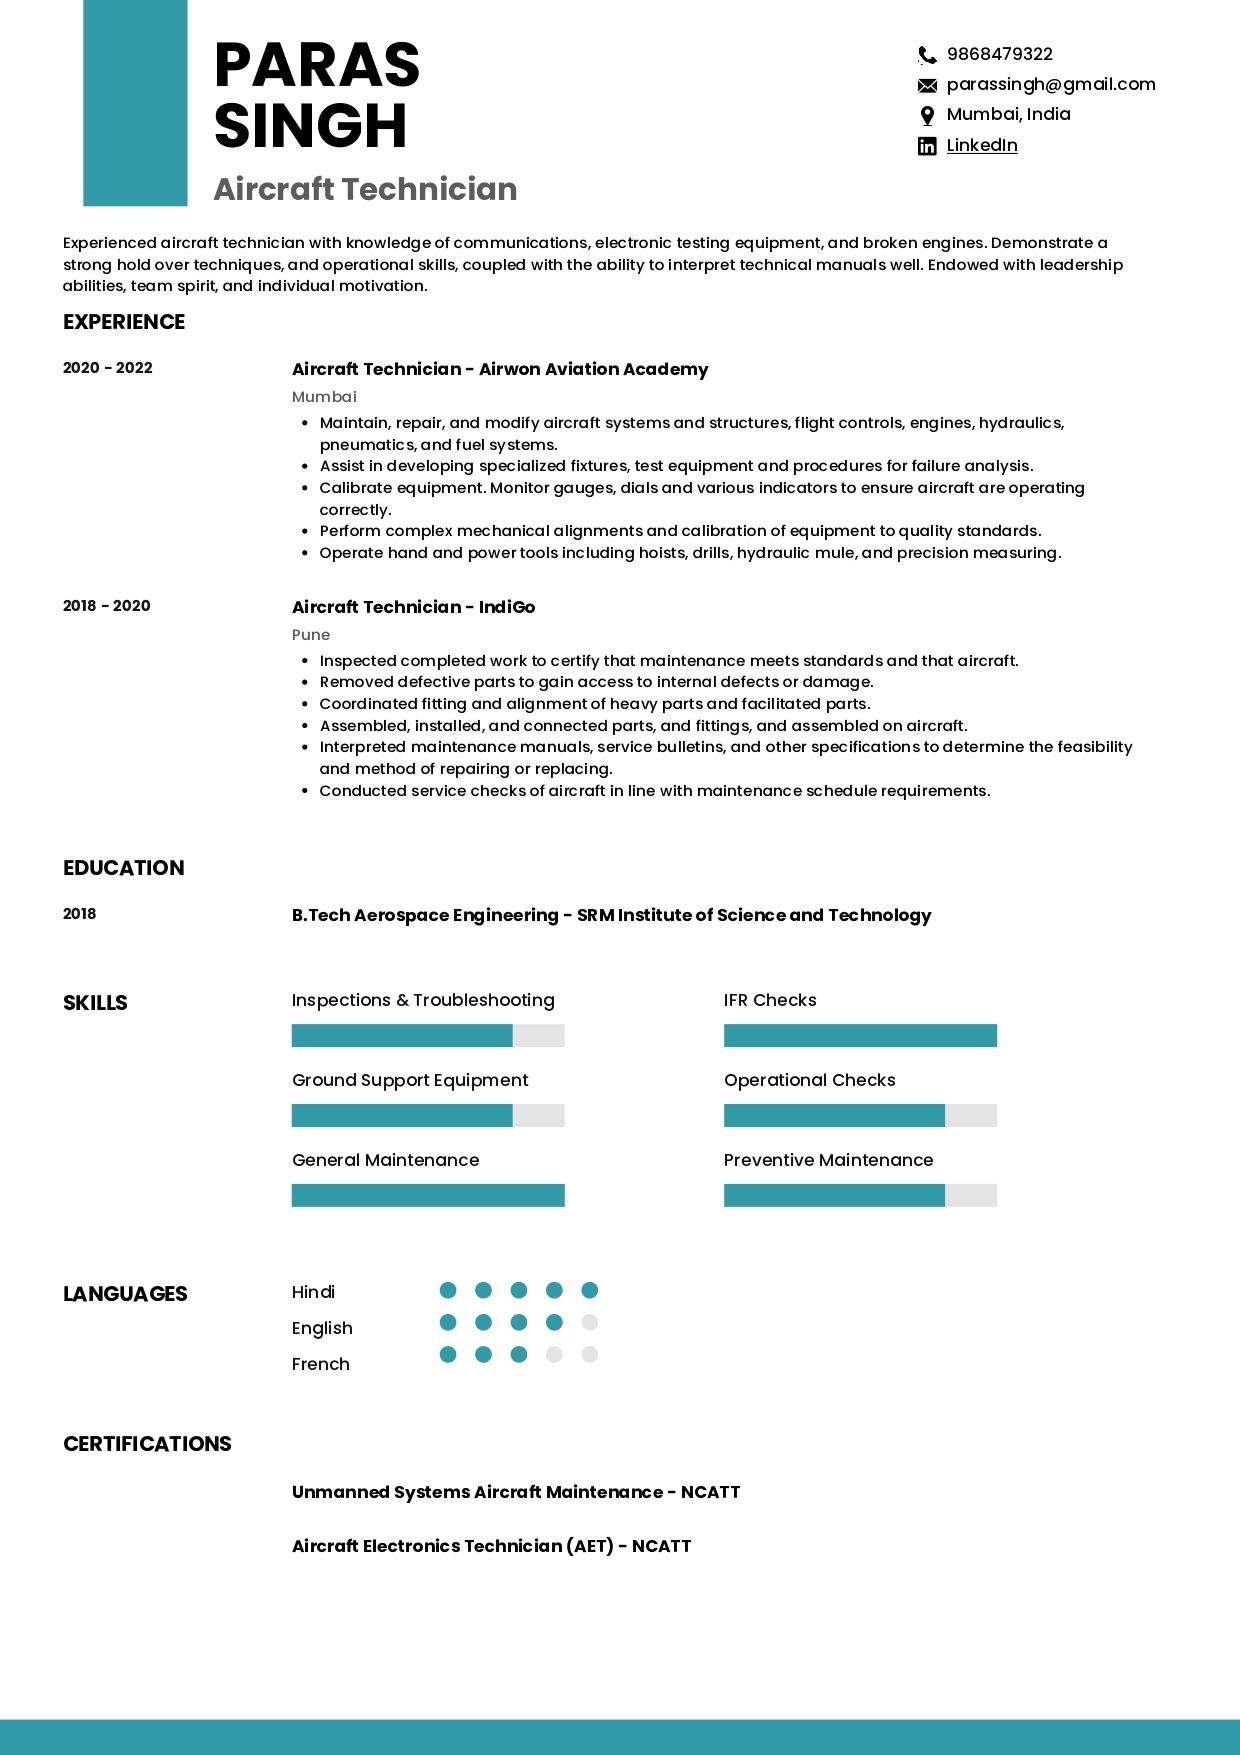 Sample Resume of Aircraft Technician | Free Resume Templates & Samples on Resumod.co